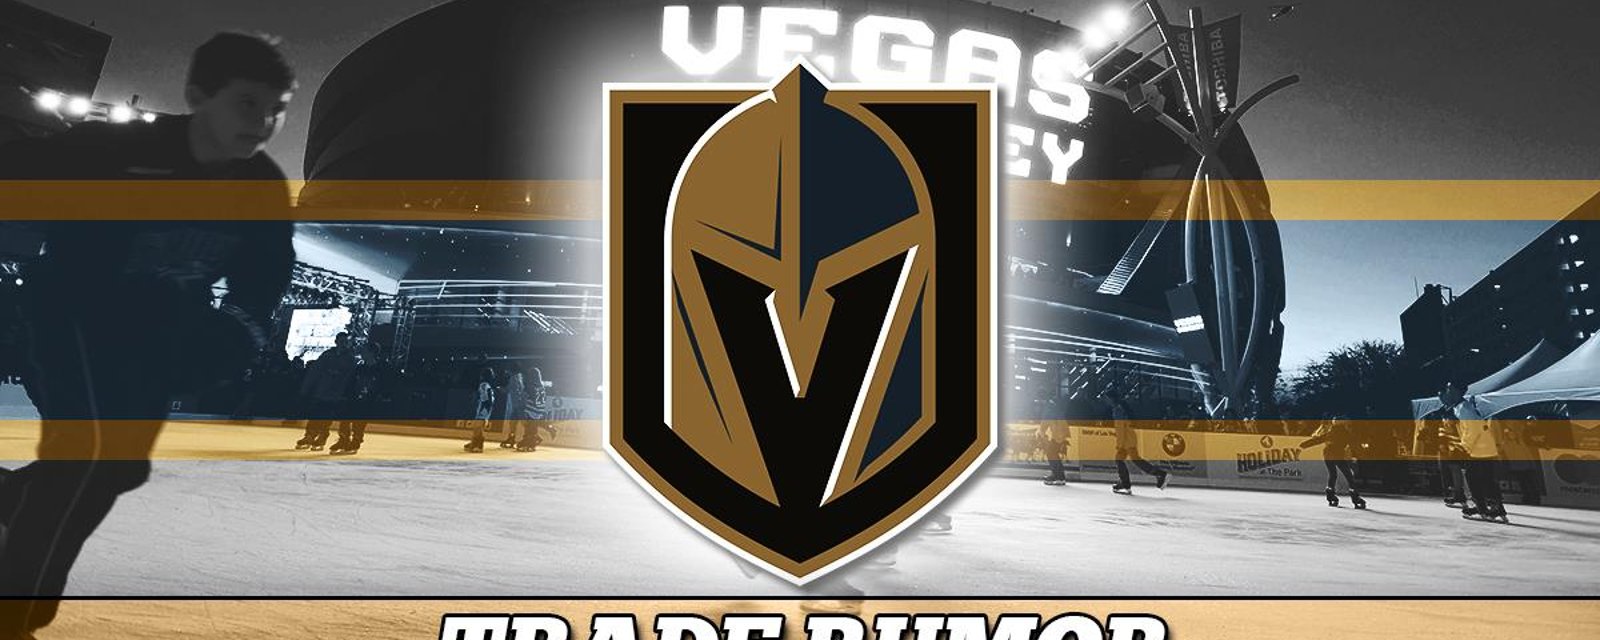 Breaking: Rumors of big trade including veteran player and first round pick going to Vegas.